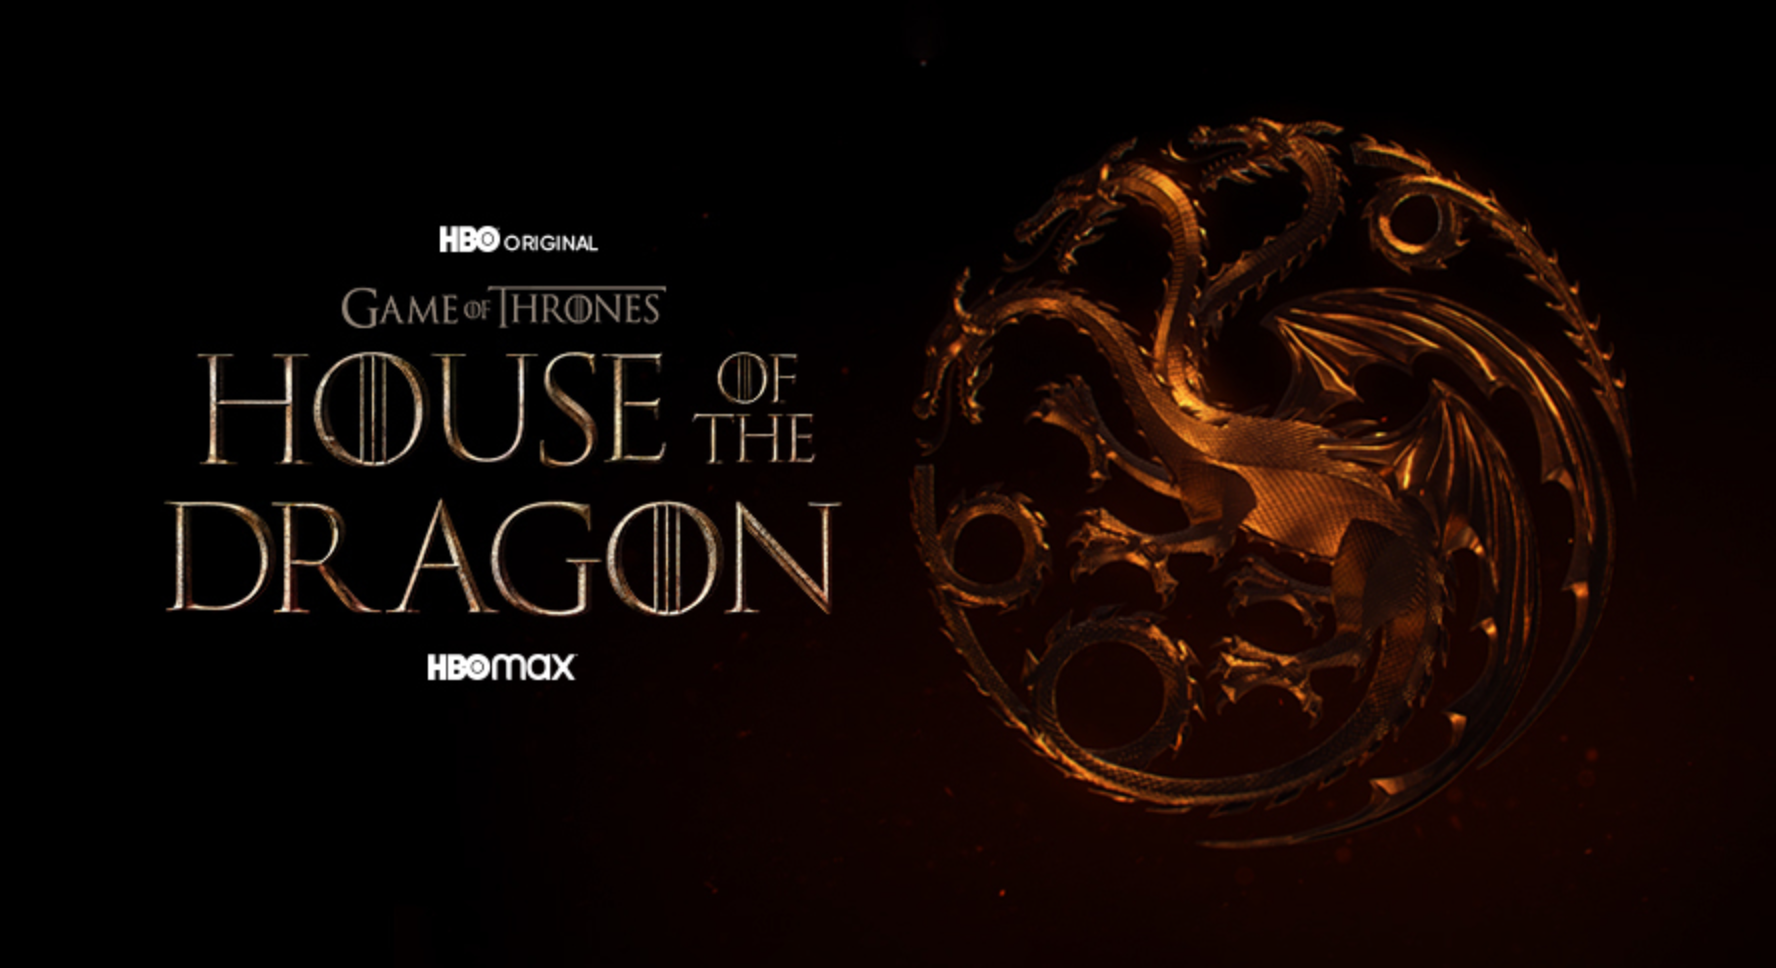 house-of-the-dragon-premiere-date-sets-up-lord-of-the-rings-showdown